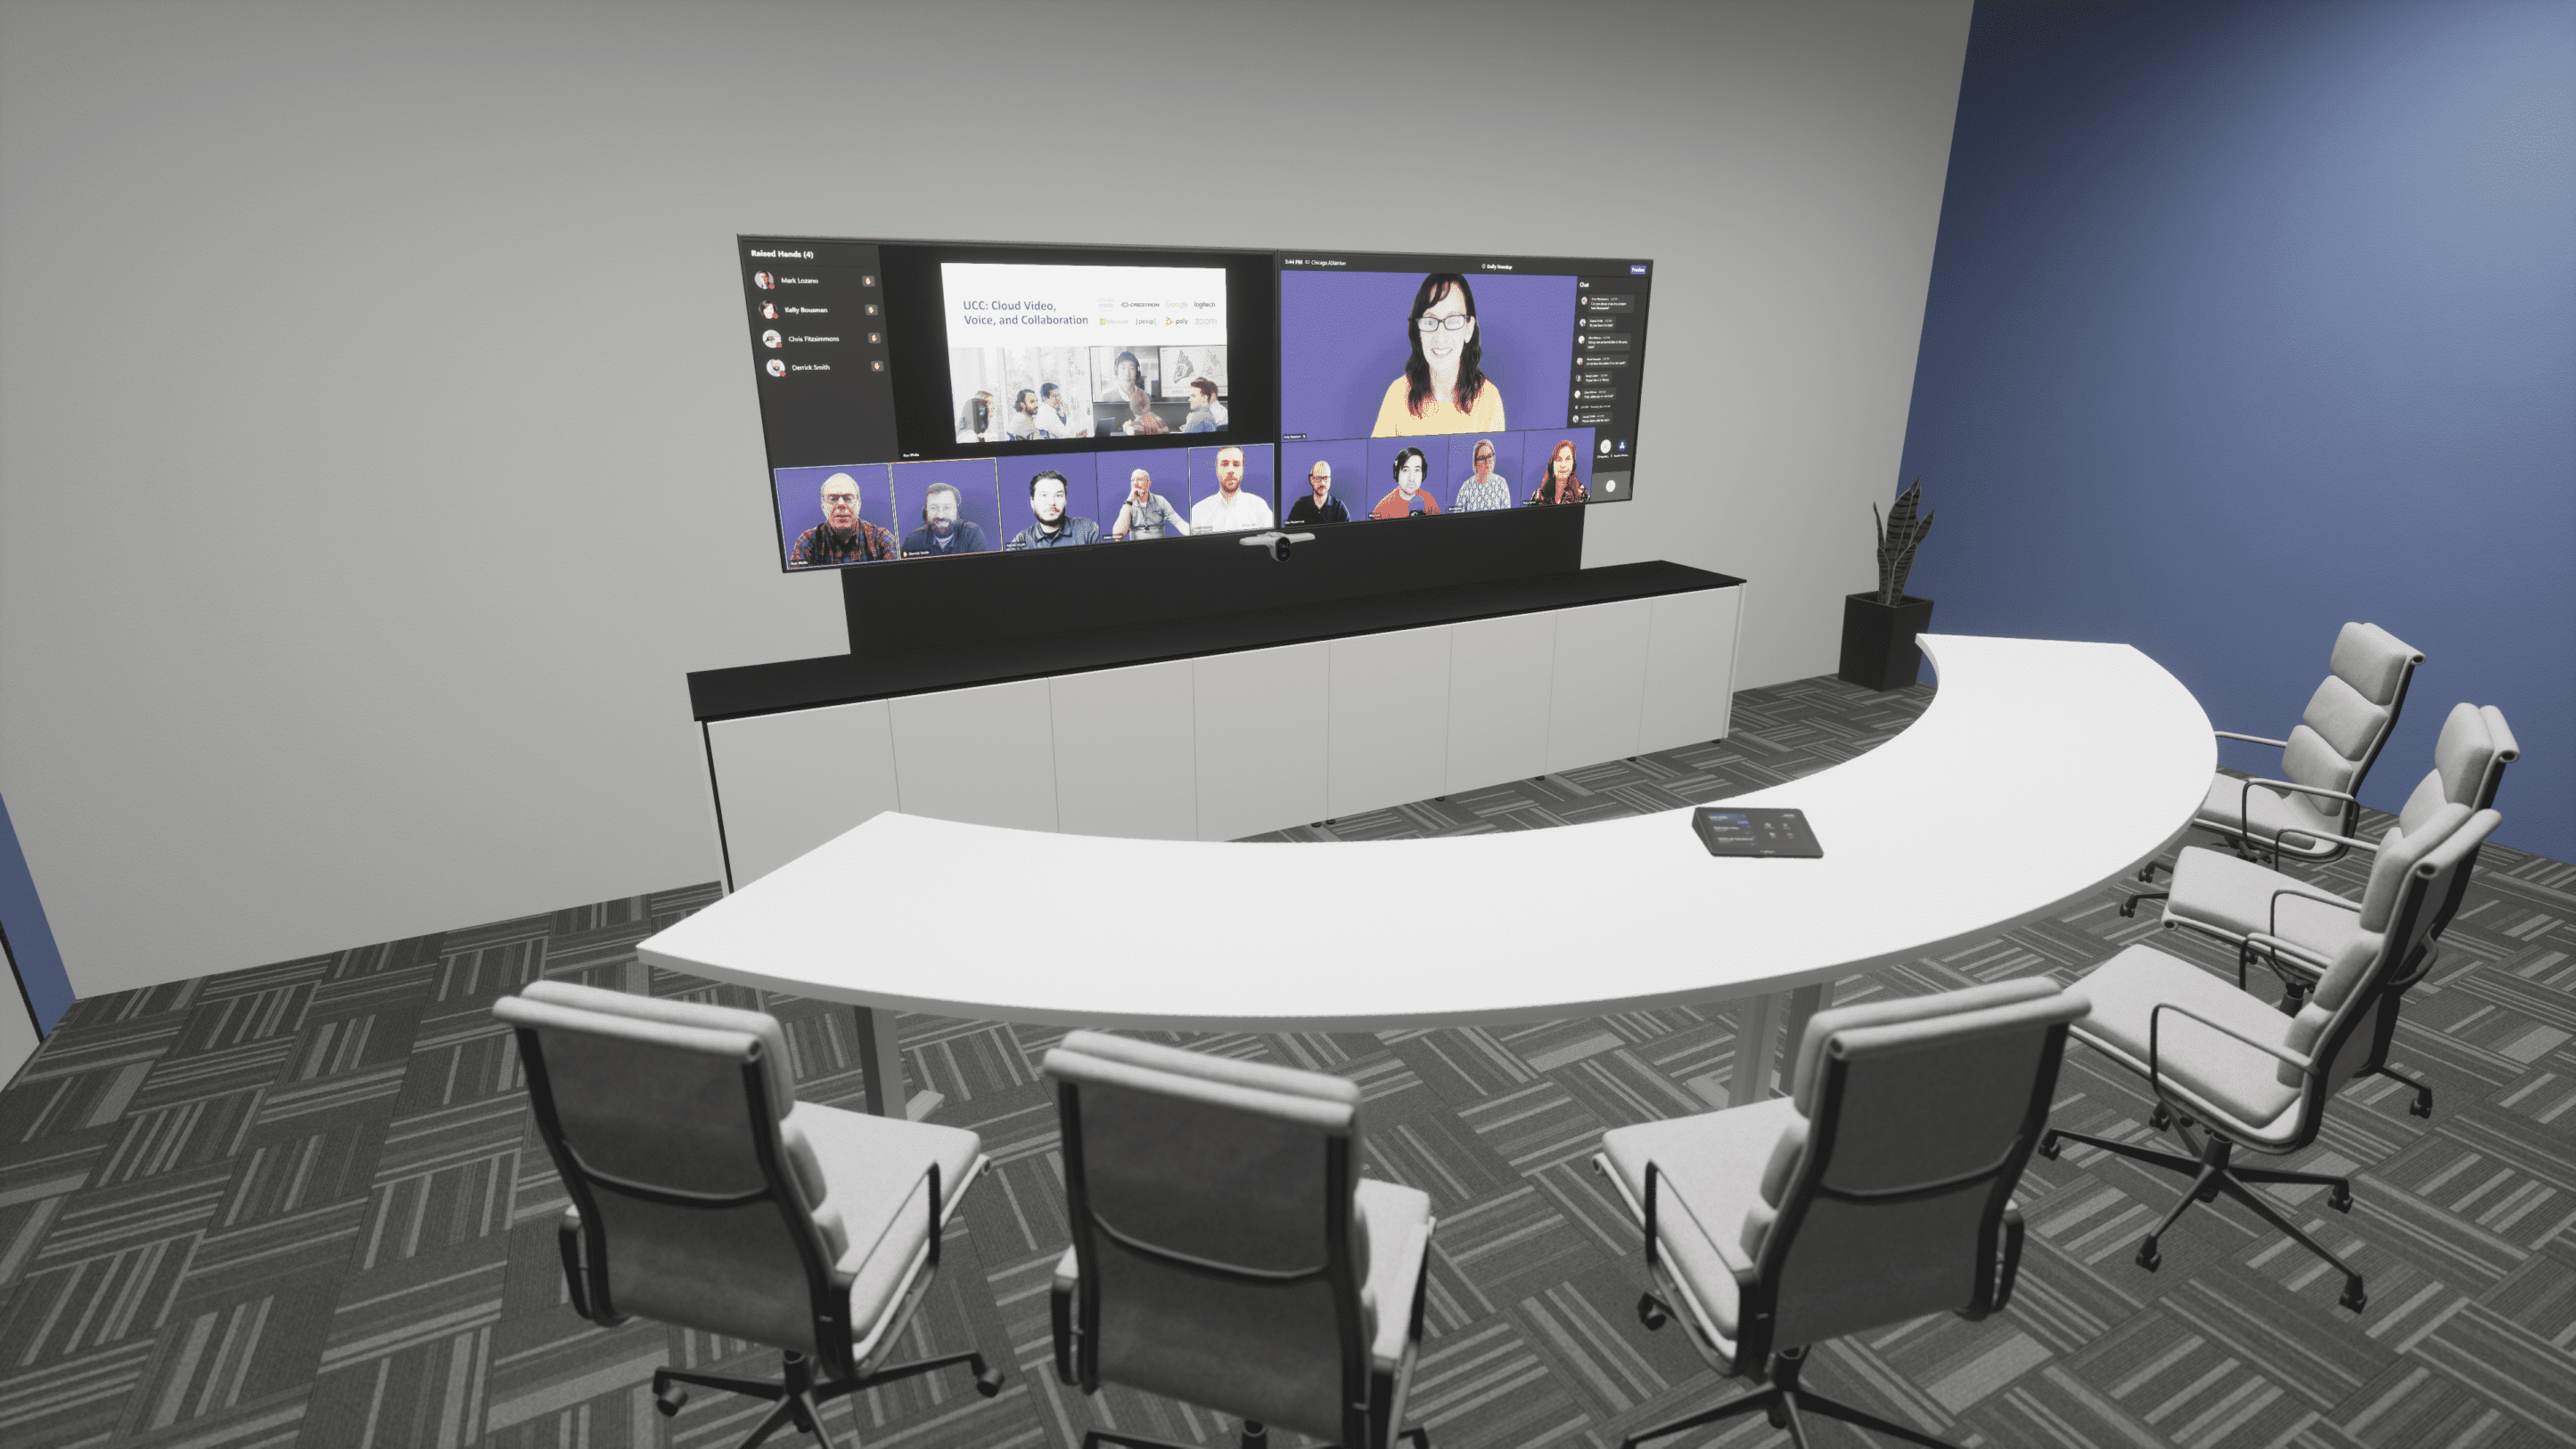 VR conference room design with Microsoft Front Row teams meeting on screen